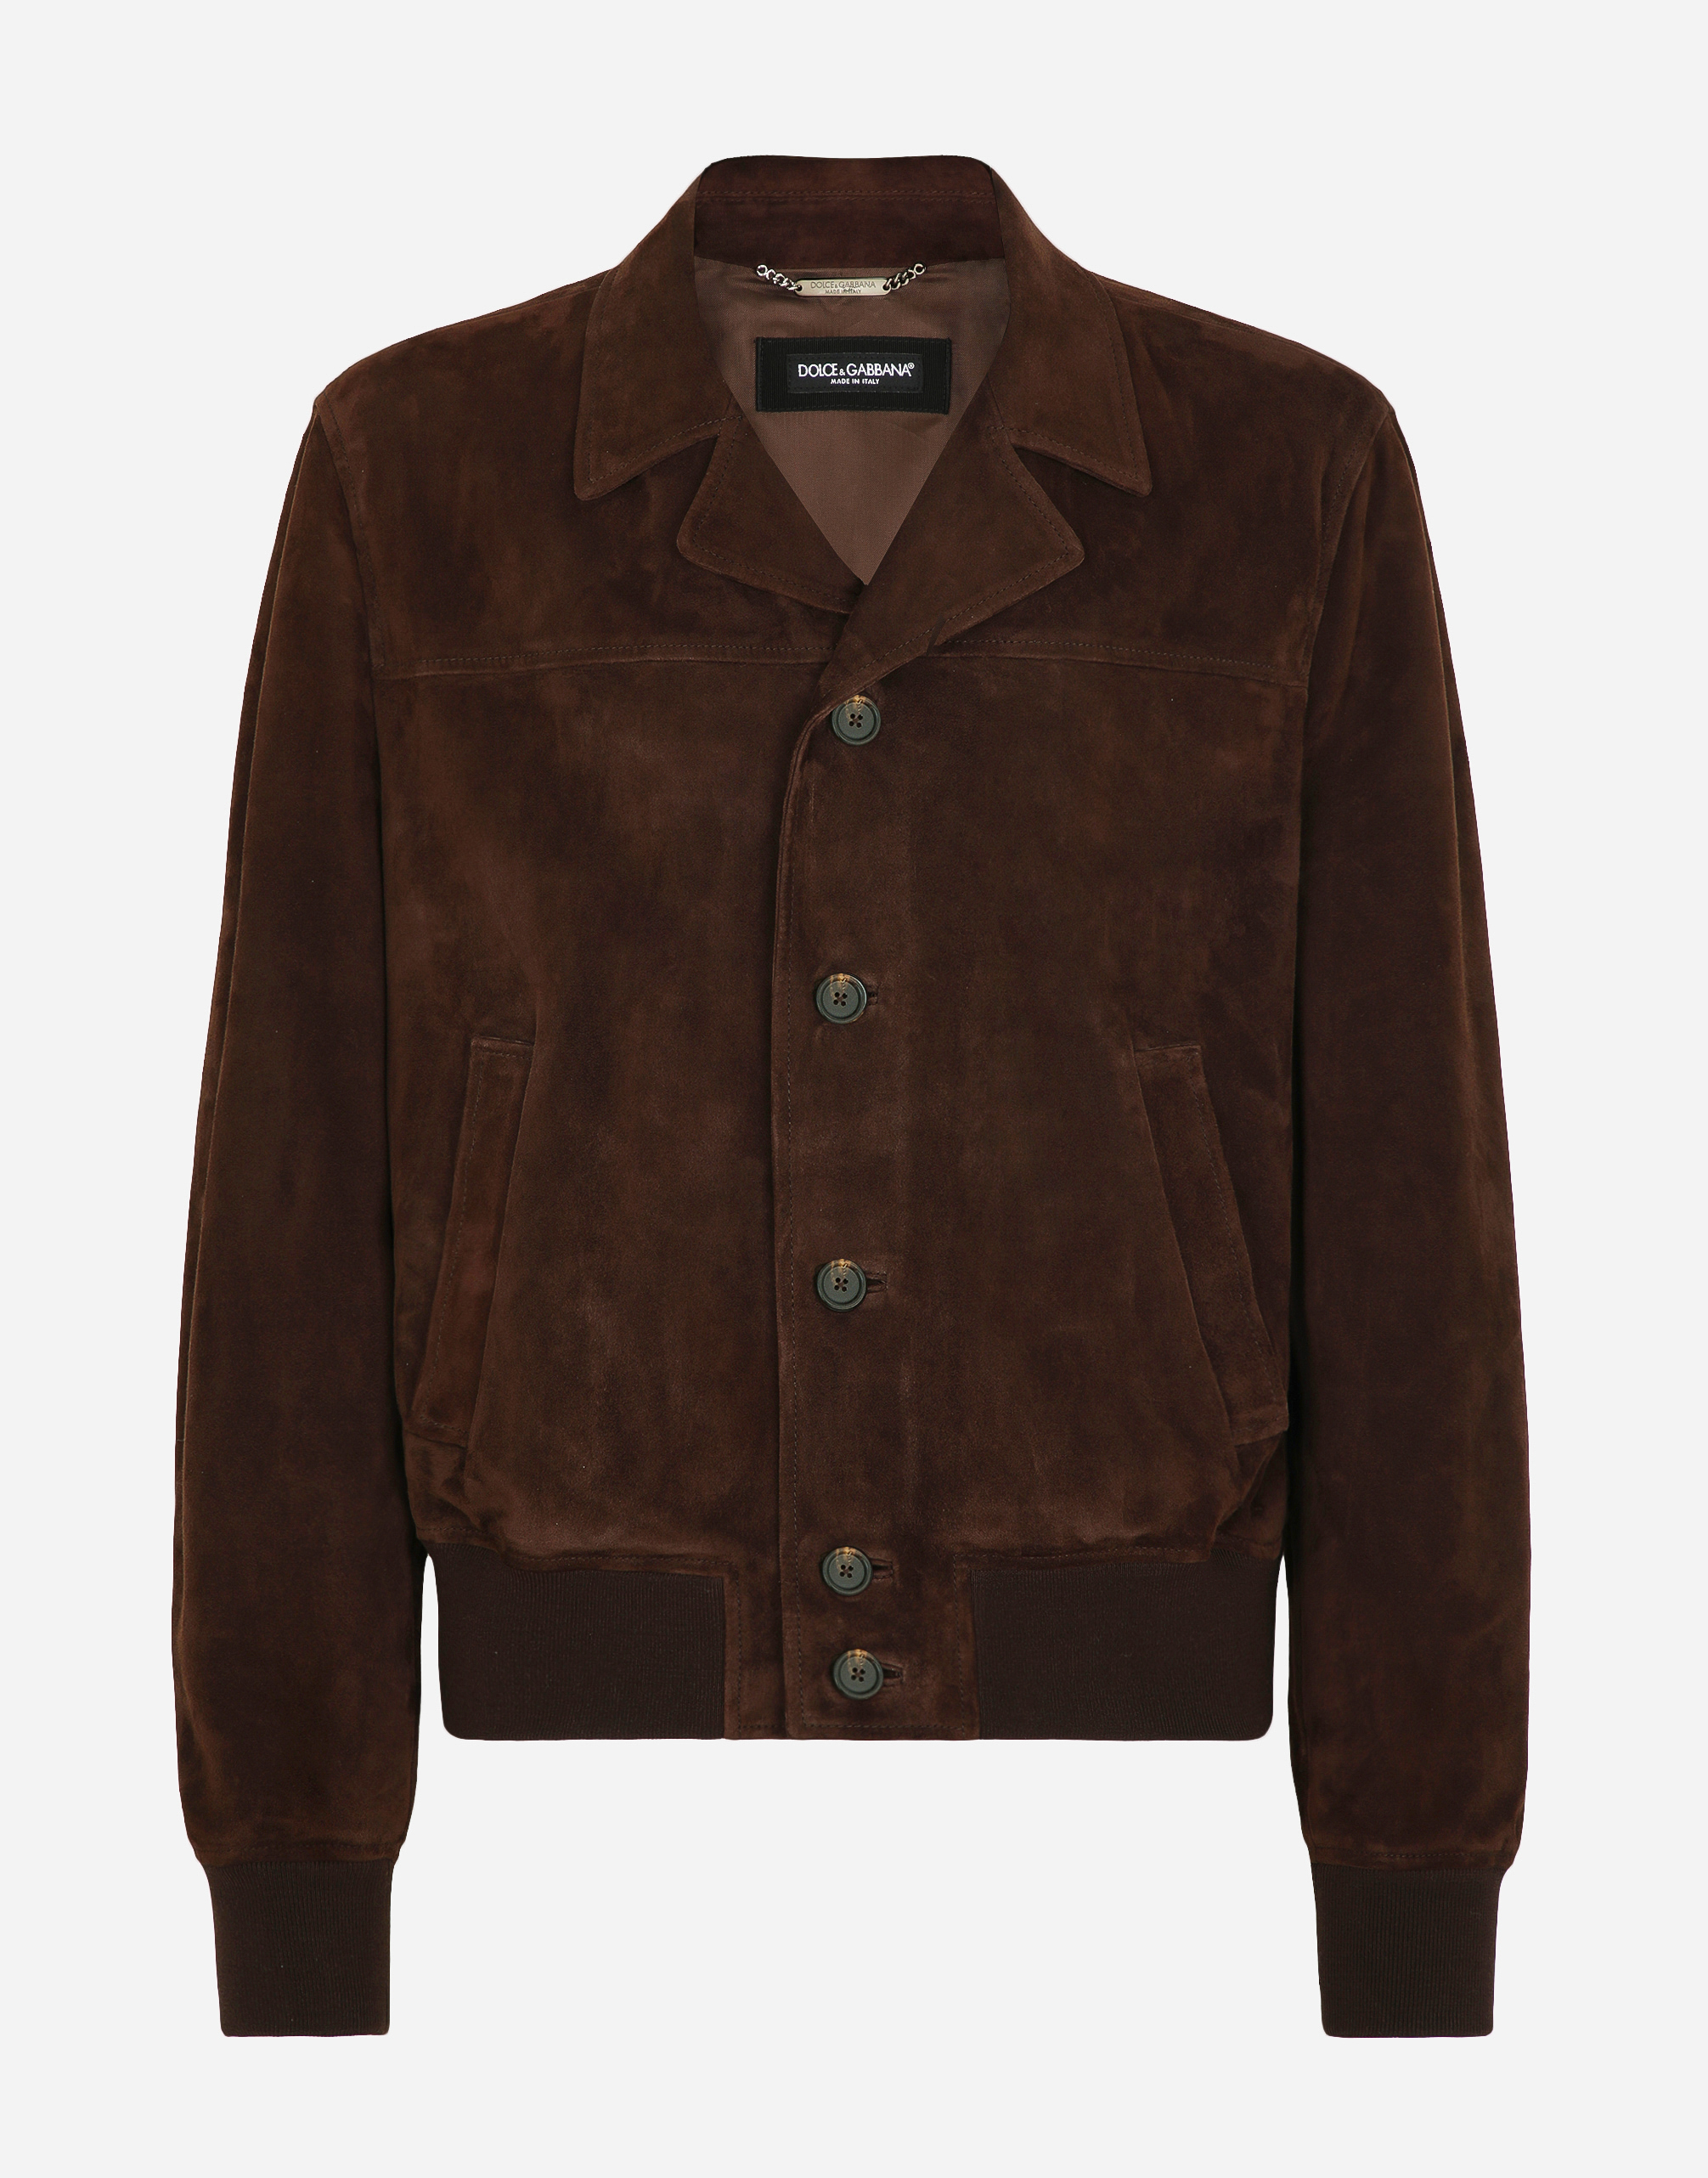 Dolce & Gabbana Nappa Suede Bomber Jacket In Brown